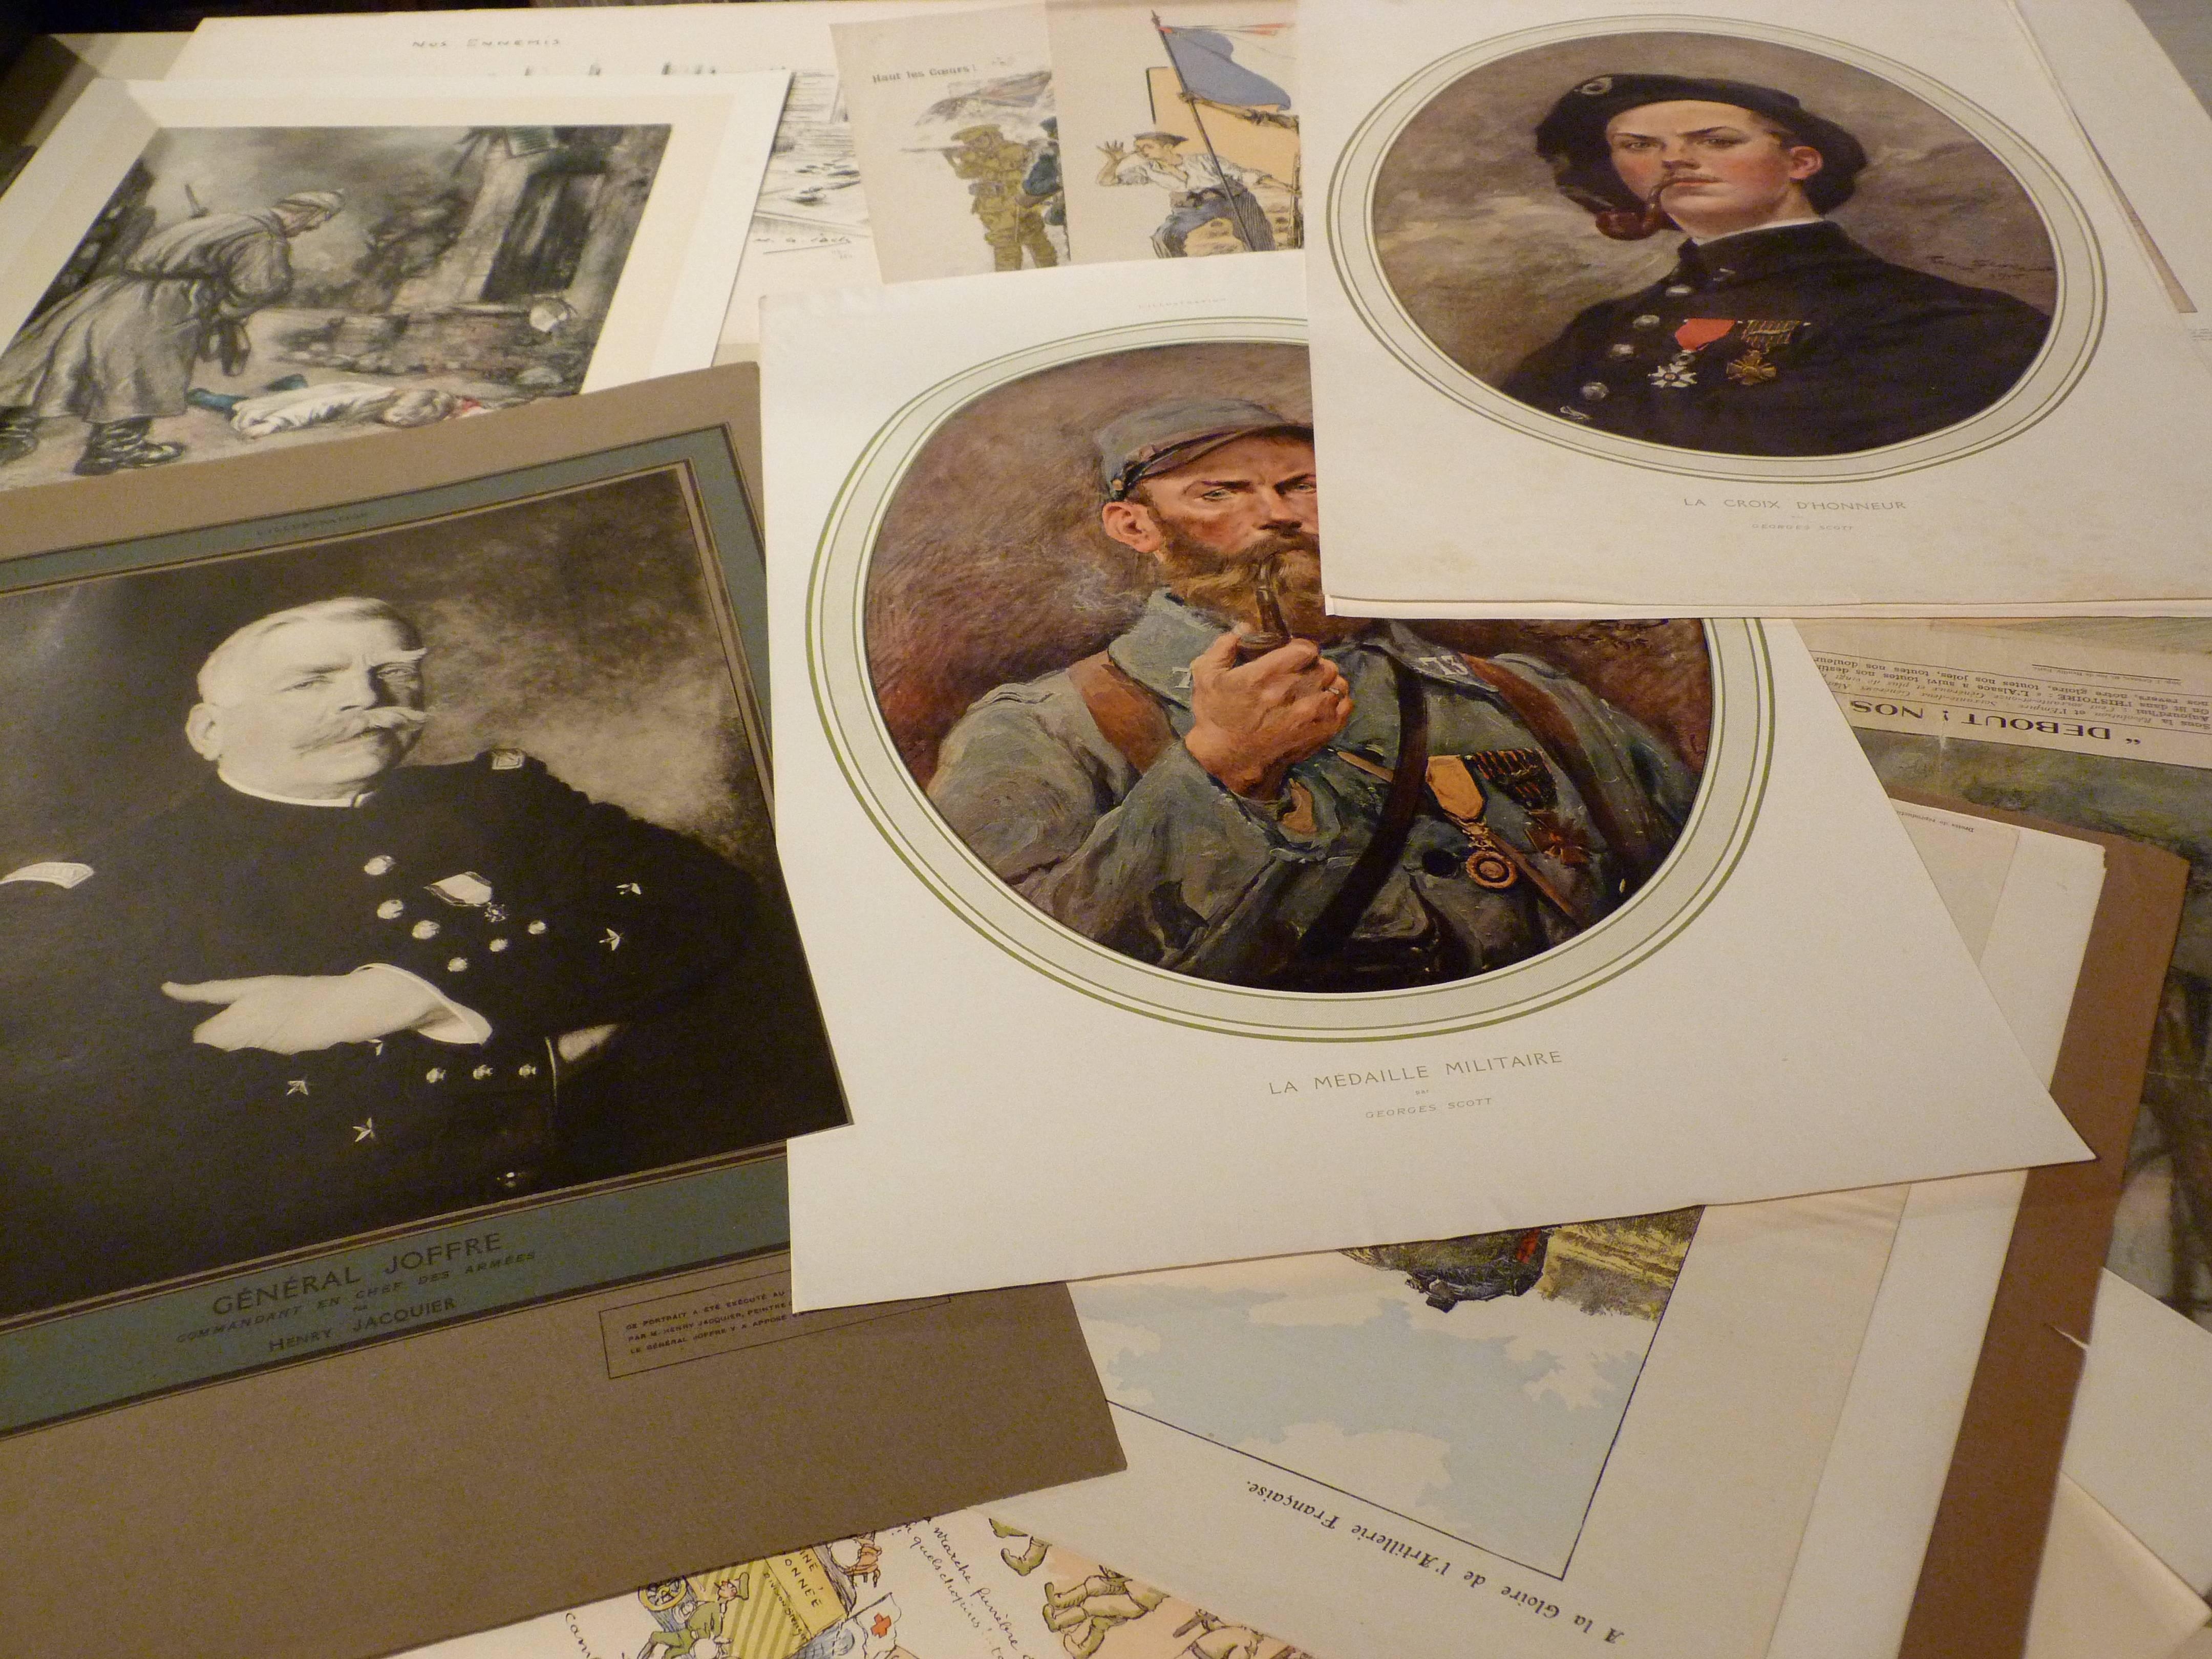 A collection of 500 originals WW1 artworks by various artists - Print by Théophile Alexandre Steinlen